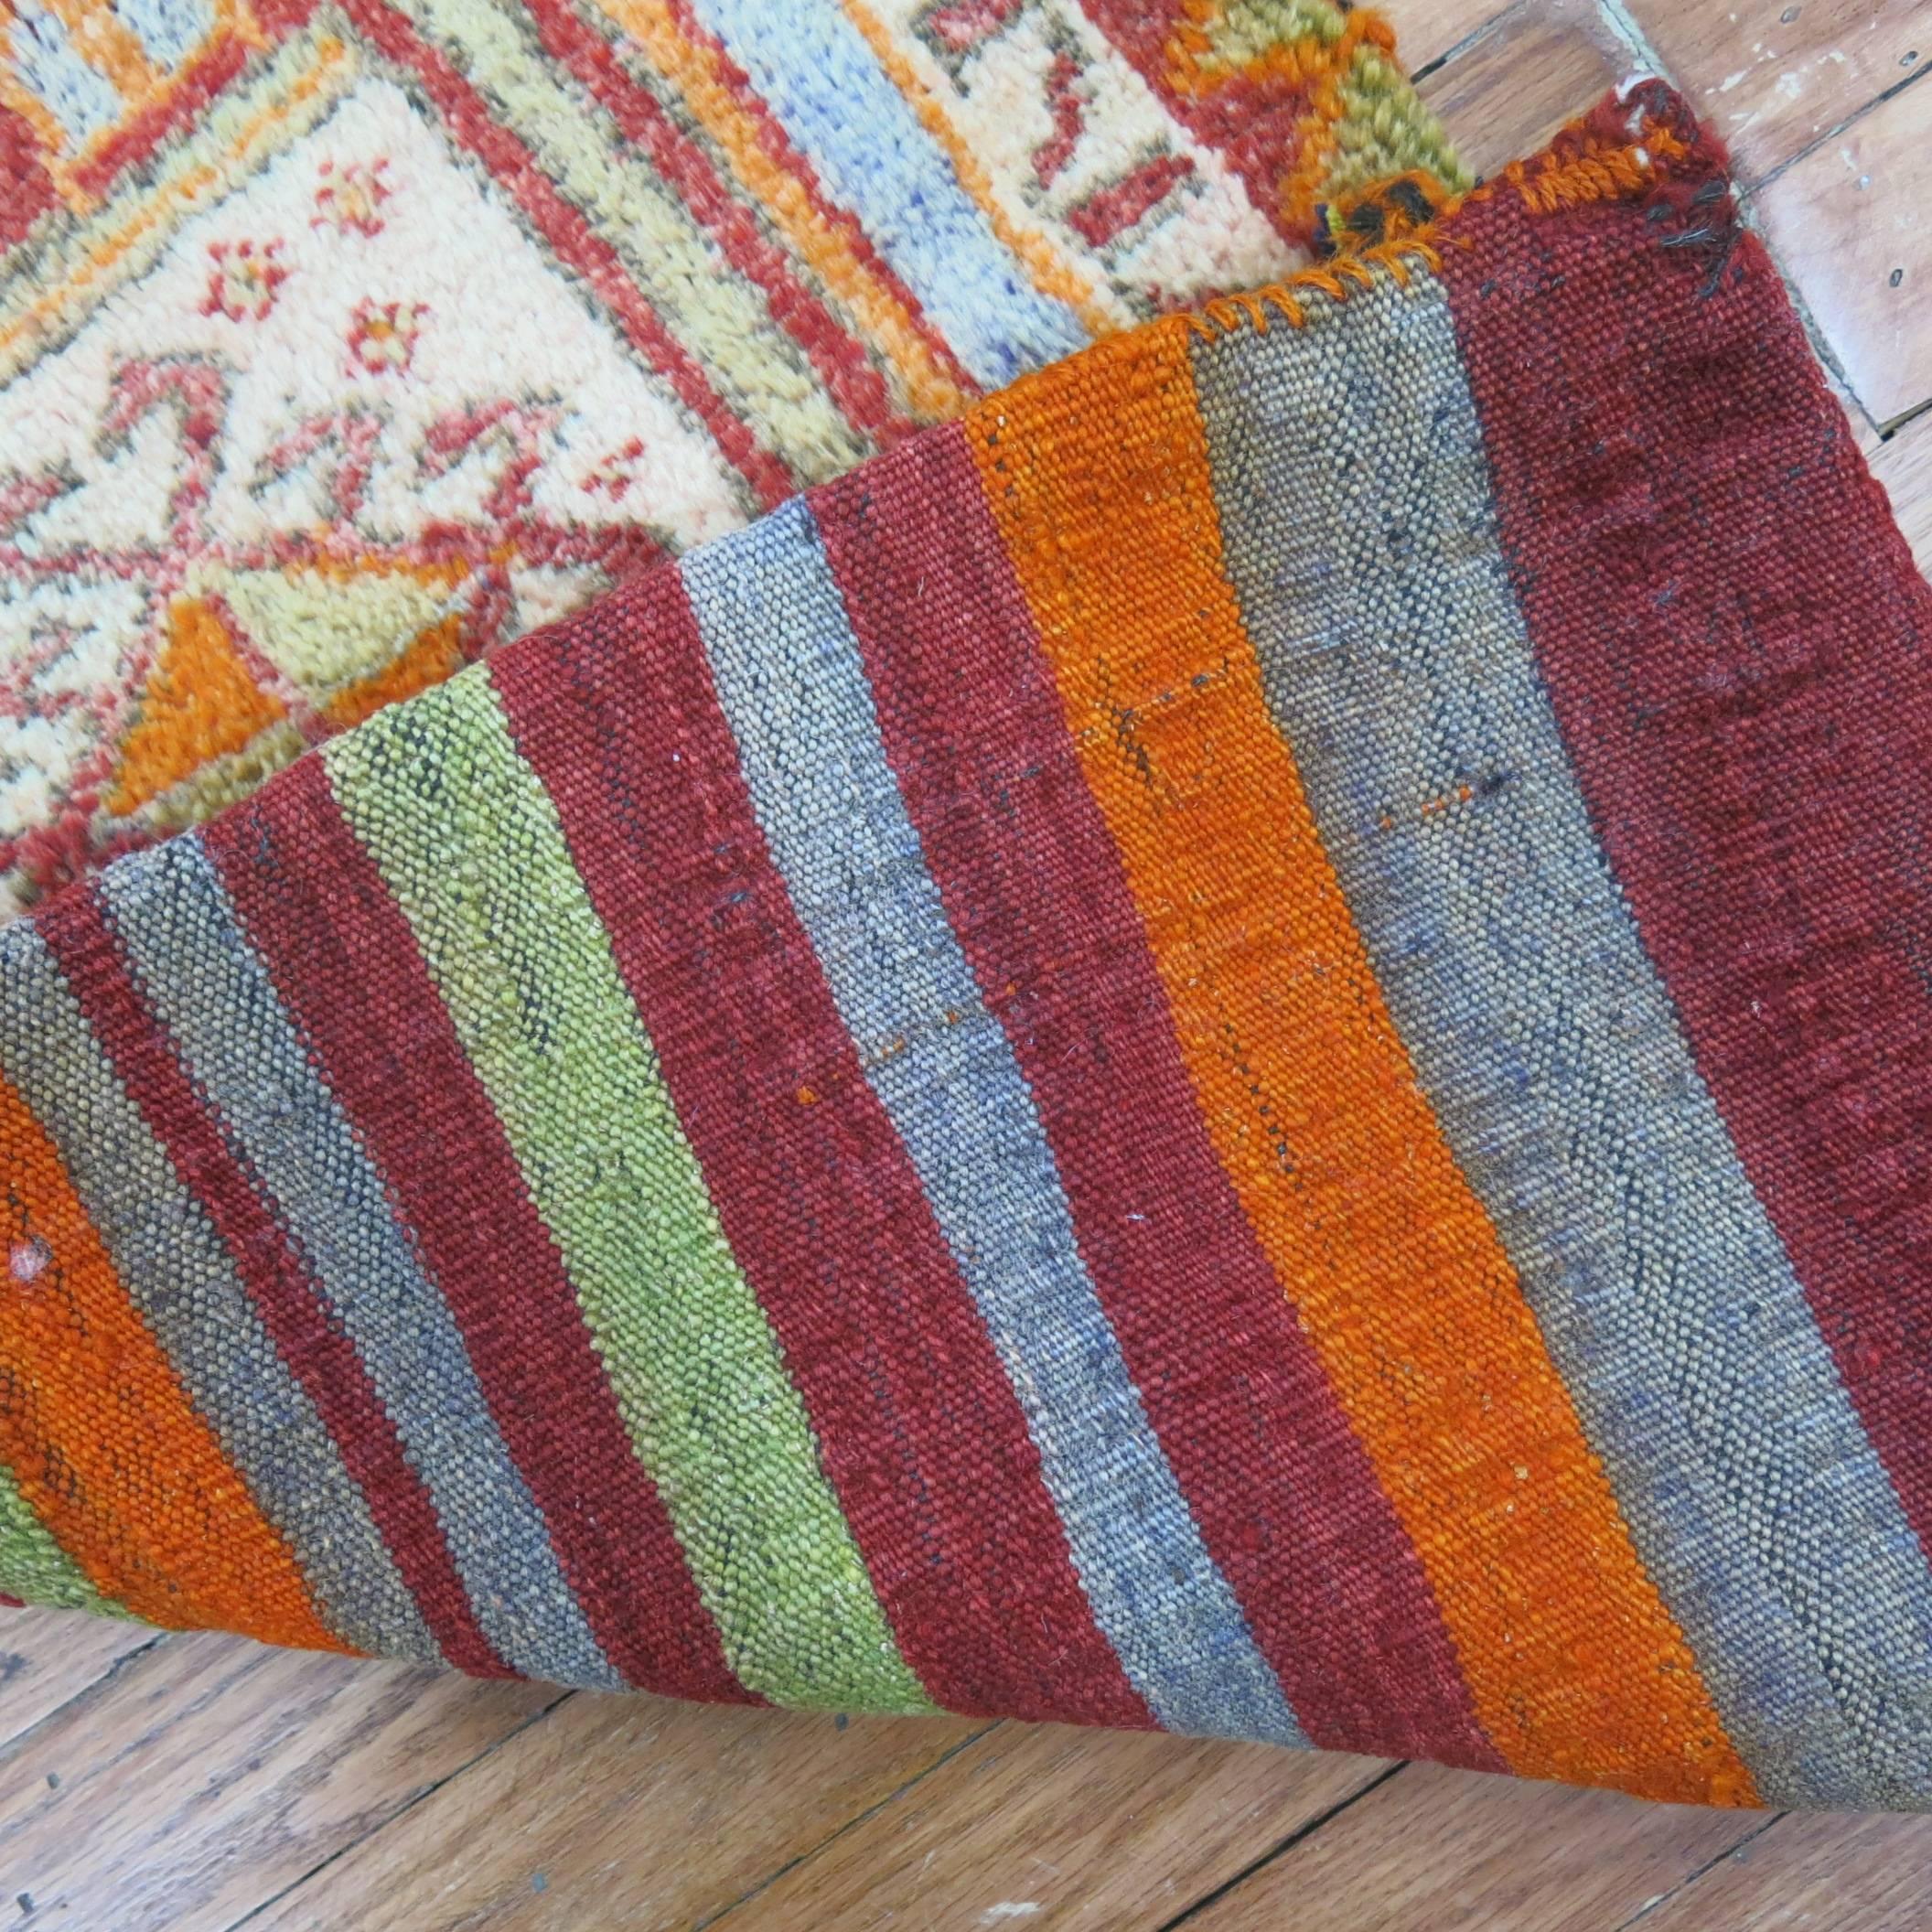 A bright Turkish yastik rug with striped Kilim back intact. One end and two sides are sewn shut while other end was kept open. Can be used as a throw piece or wall covering too.

1'9'' x 3'2''